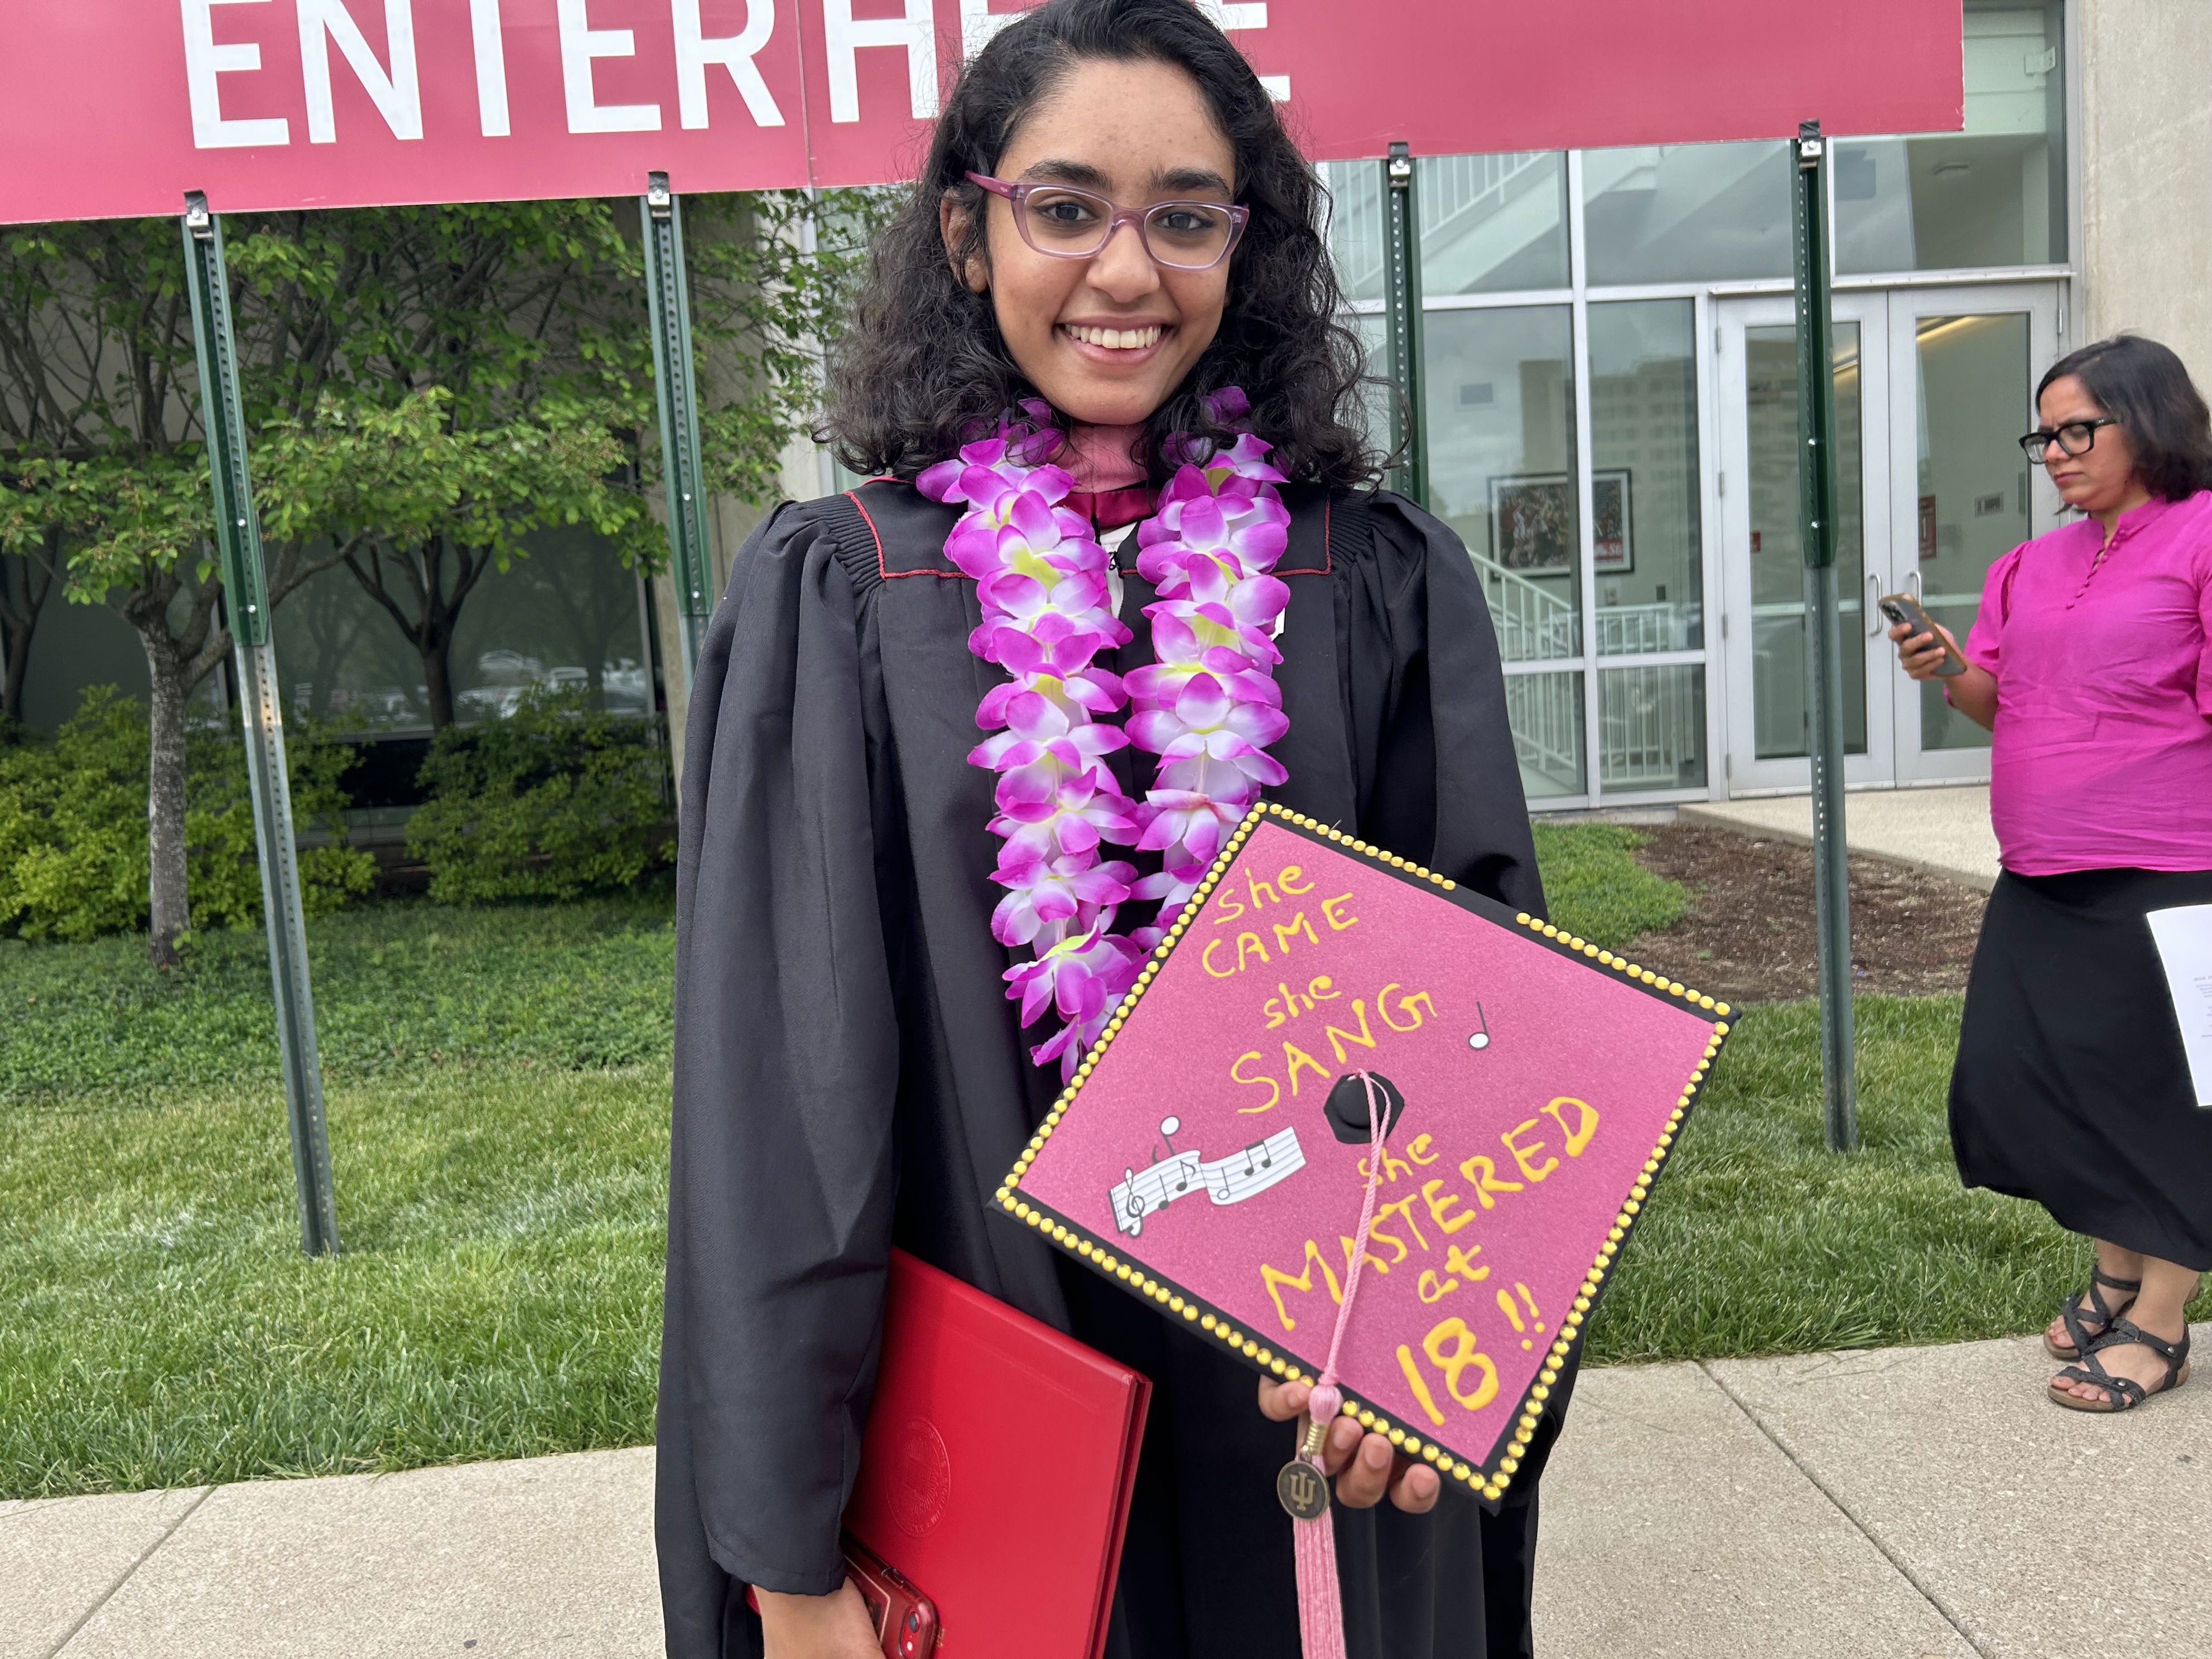 18-year-old music prodigy earns master's degree at indiana university